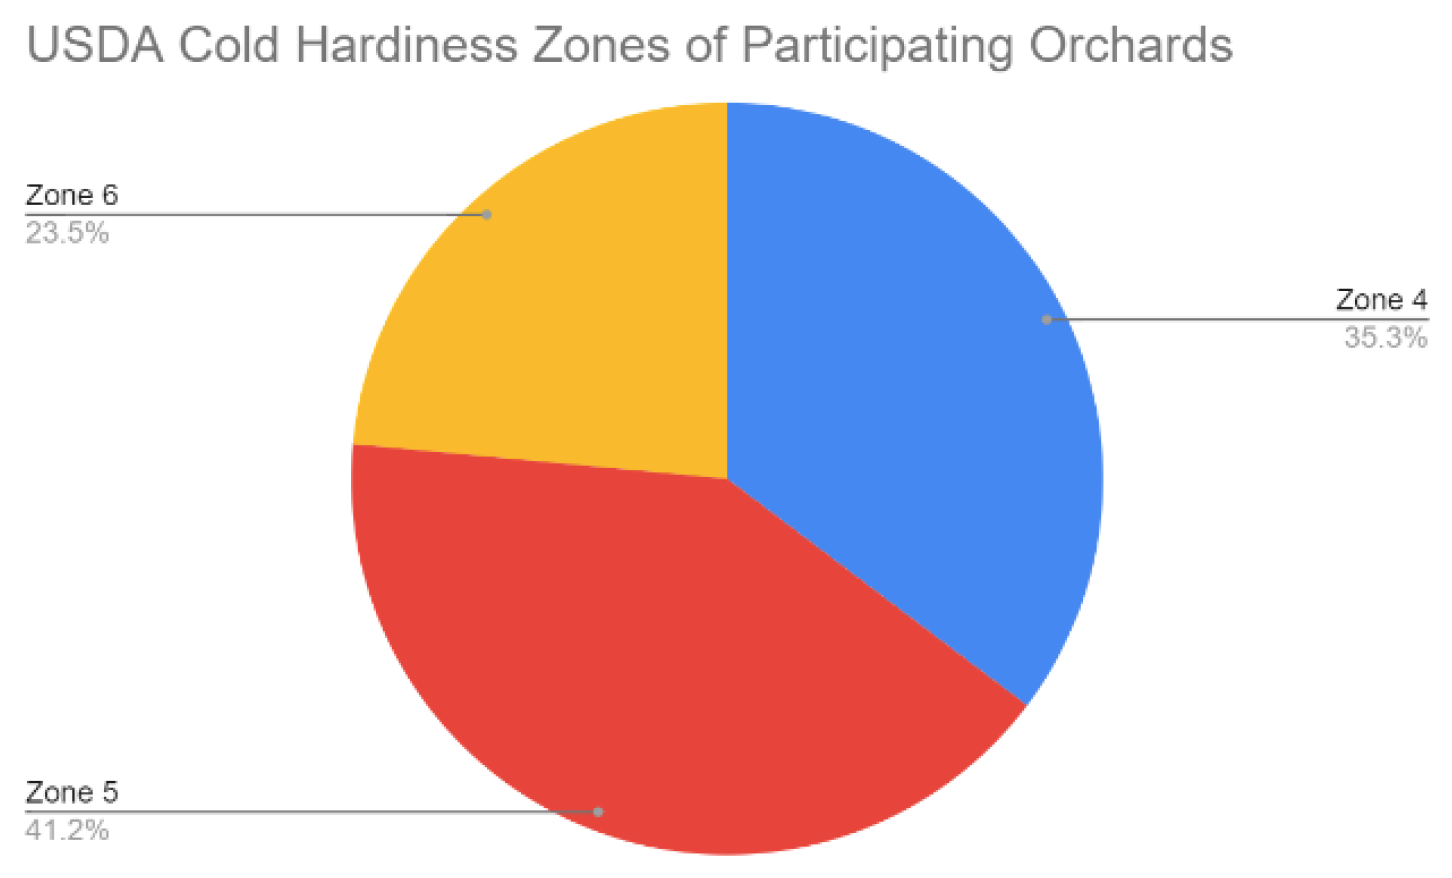 cold hardiness of participating orchards